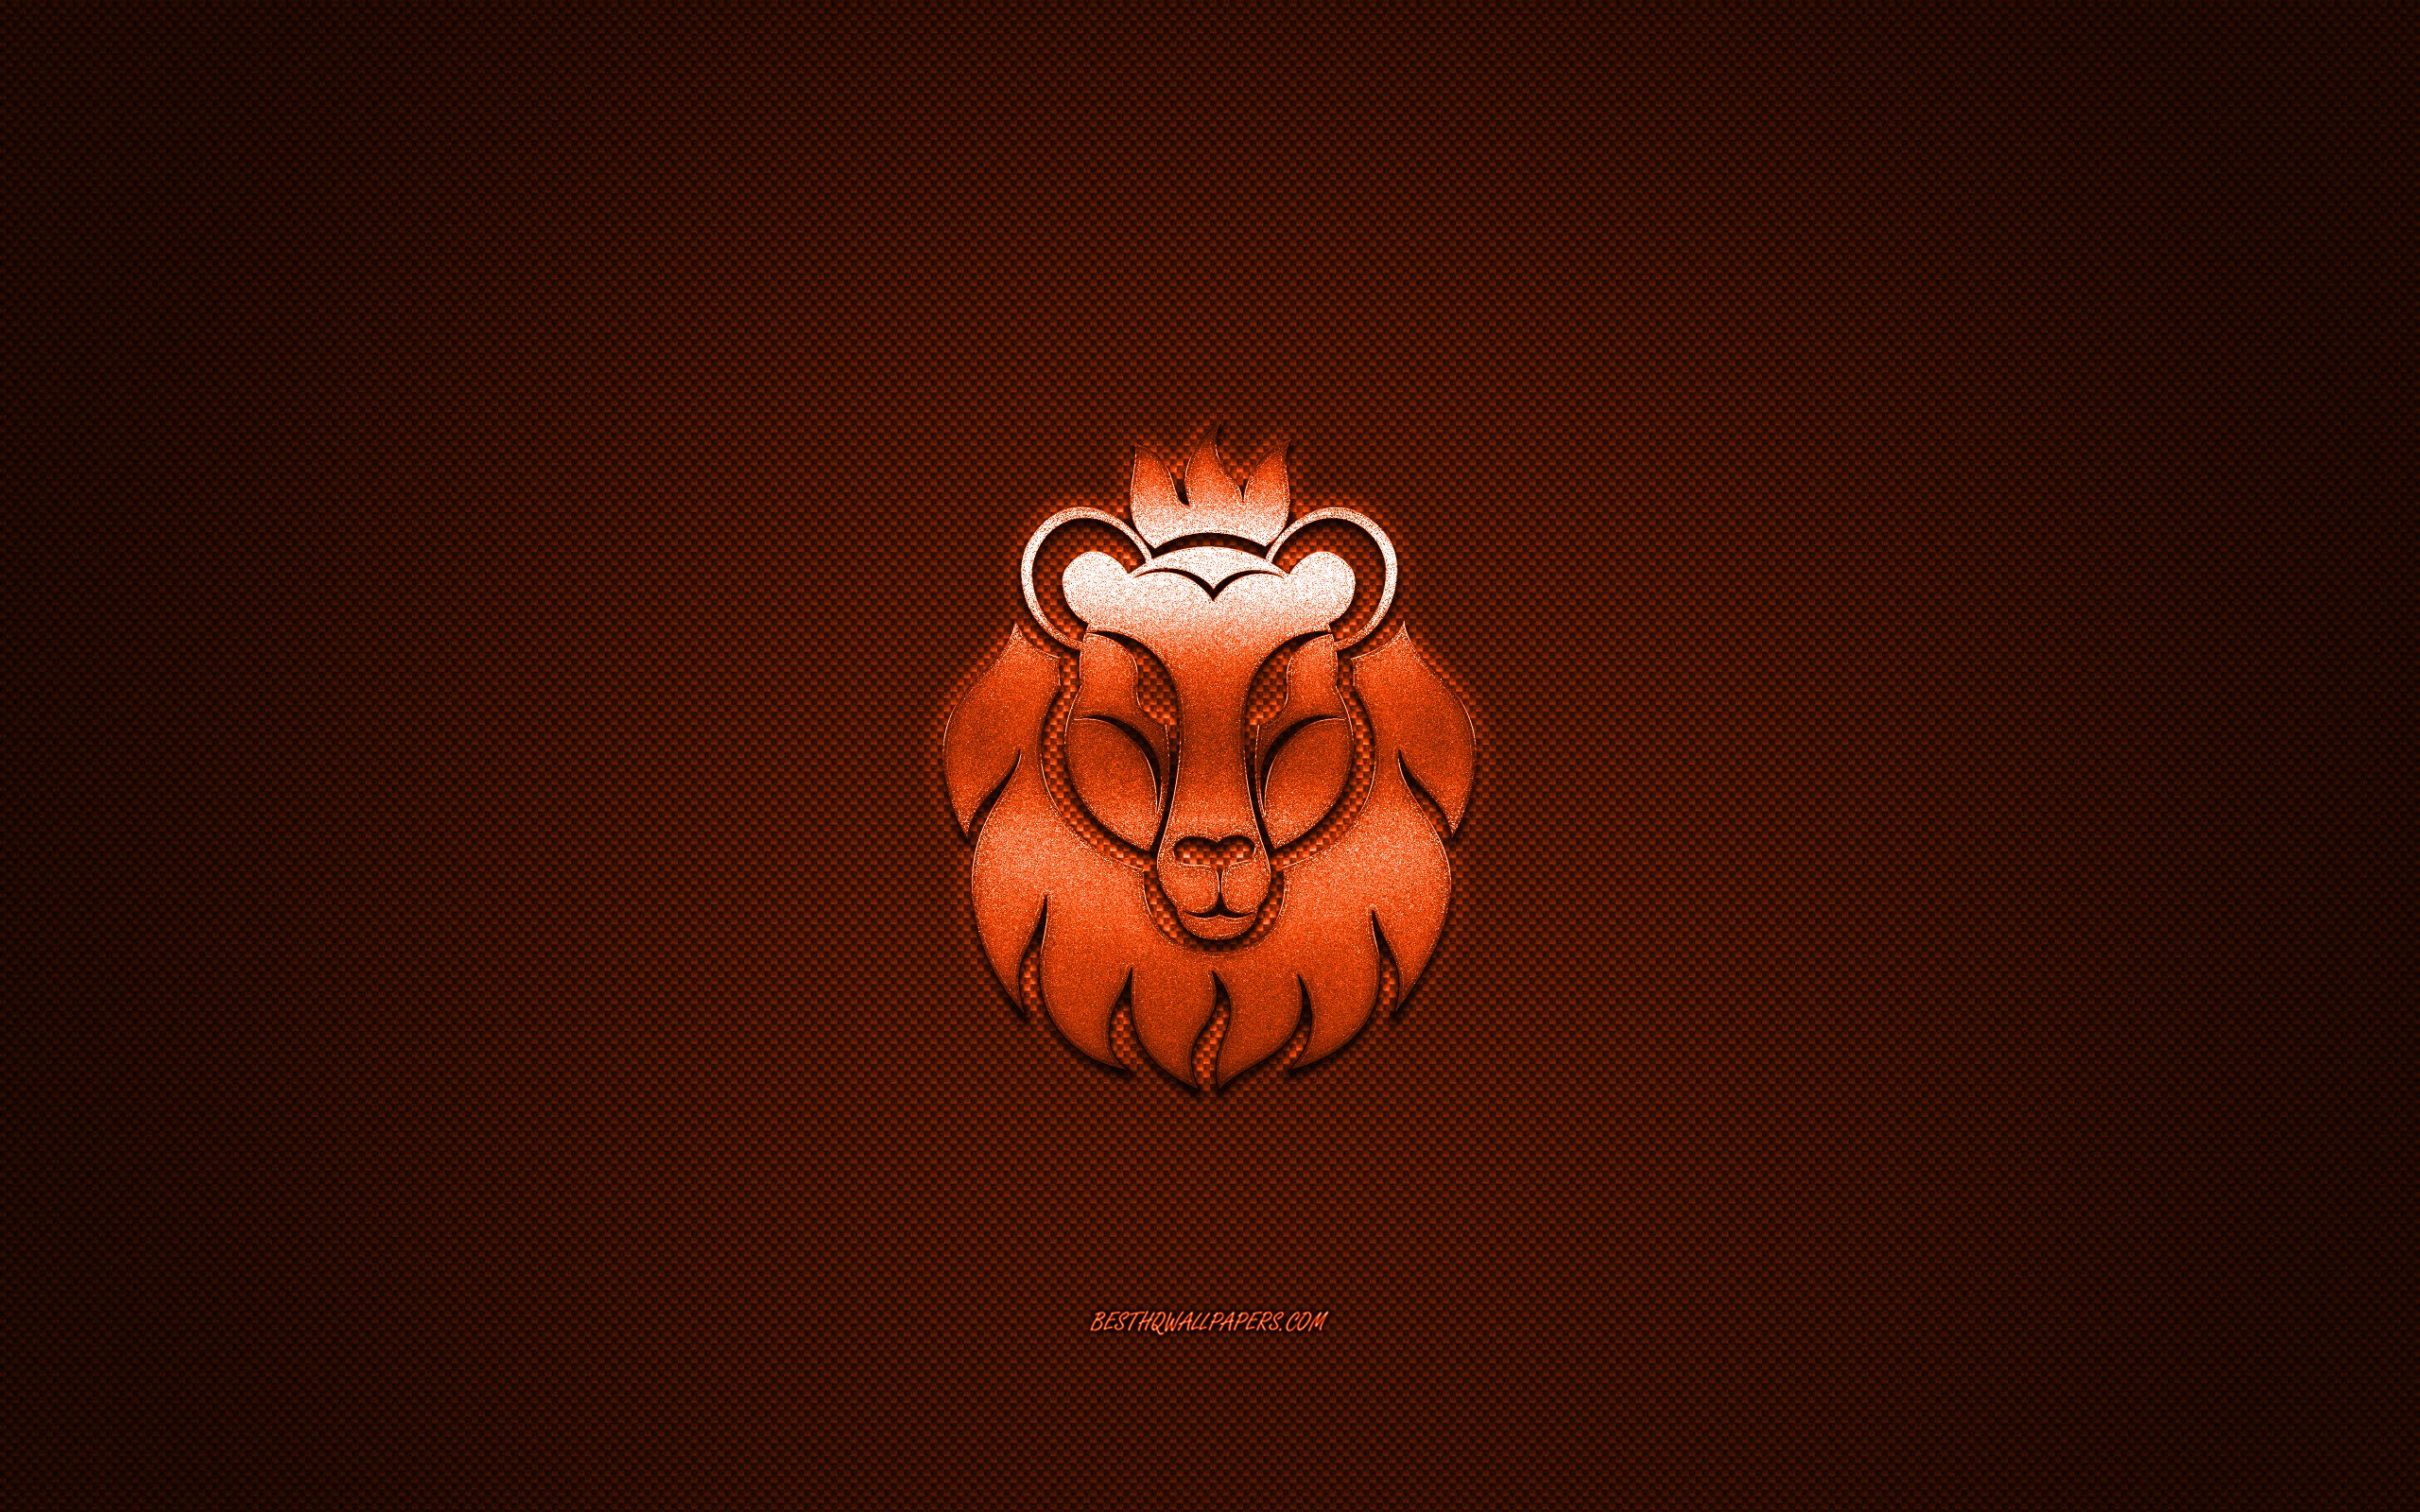 Download wallpapers Leo zodiac sign, metallic signs of the zodiac, Leo,  orange carbon background, Leo Horoscope sign, Leo zodiac symbol for desktop  with resolution 2560x1600. High Quality HD pictures wallpapers